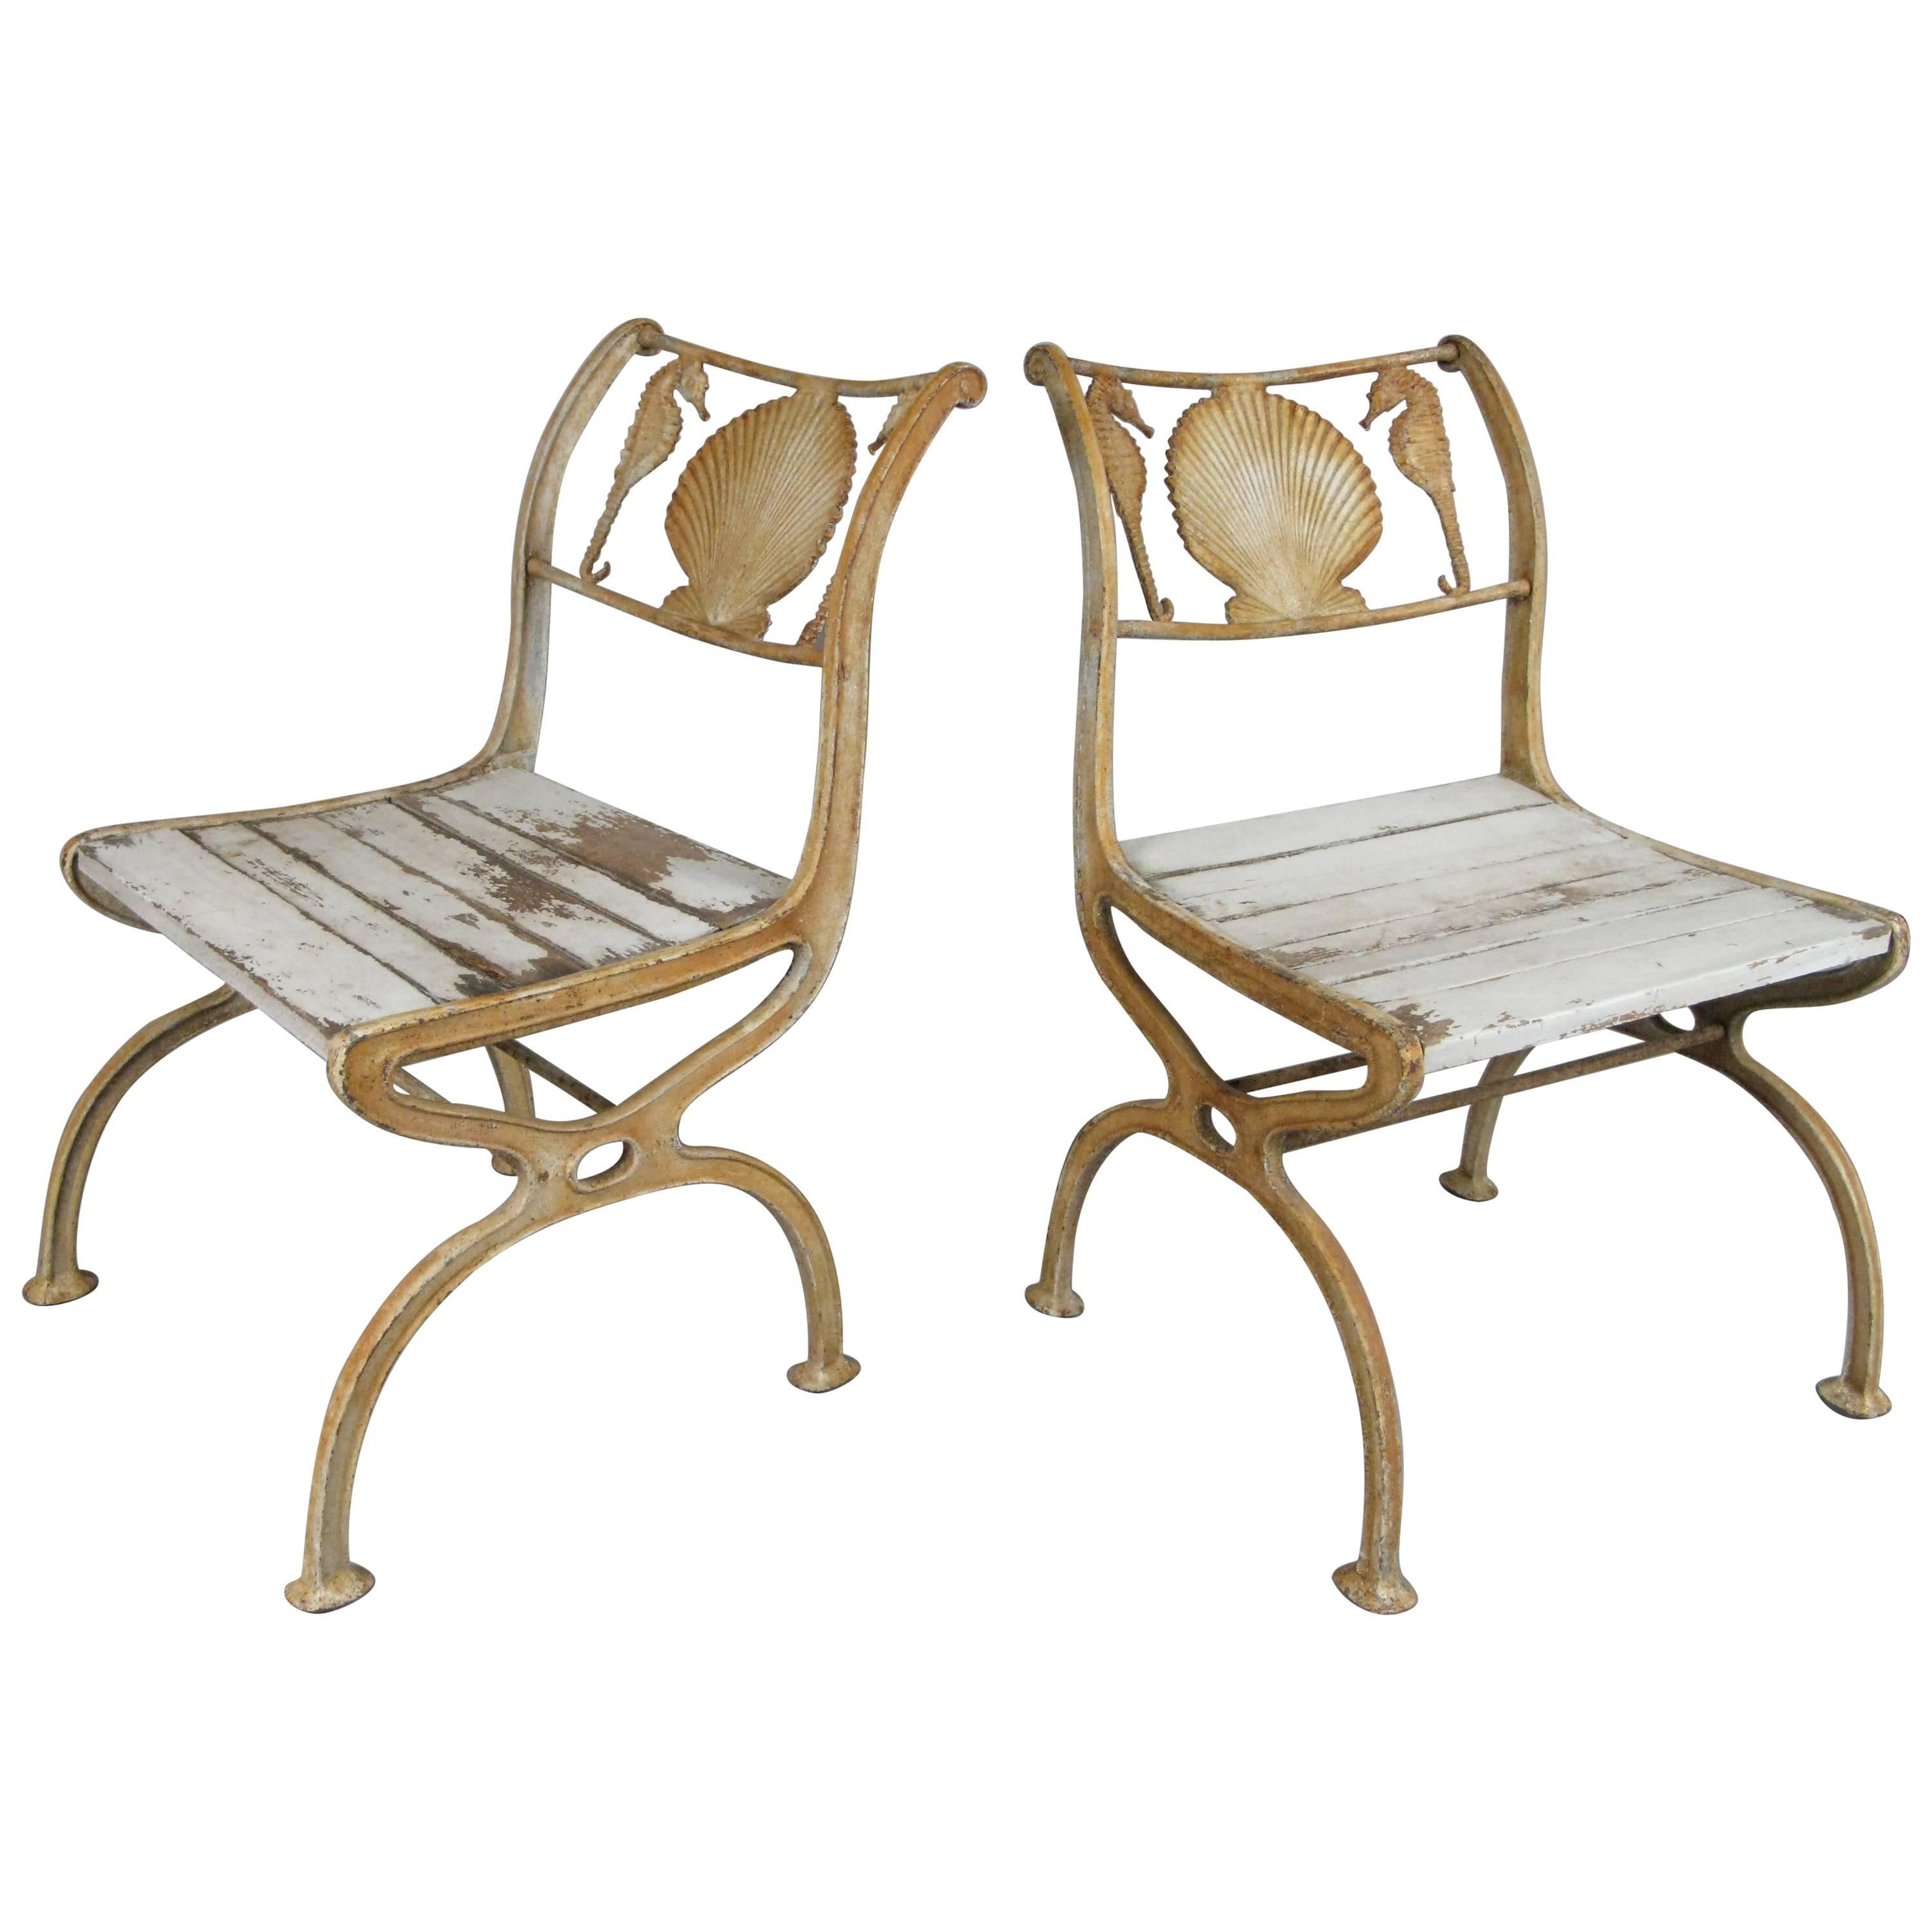 Pair of Rare 1920s Cast Iron Seashell and Seahorse Chairs